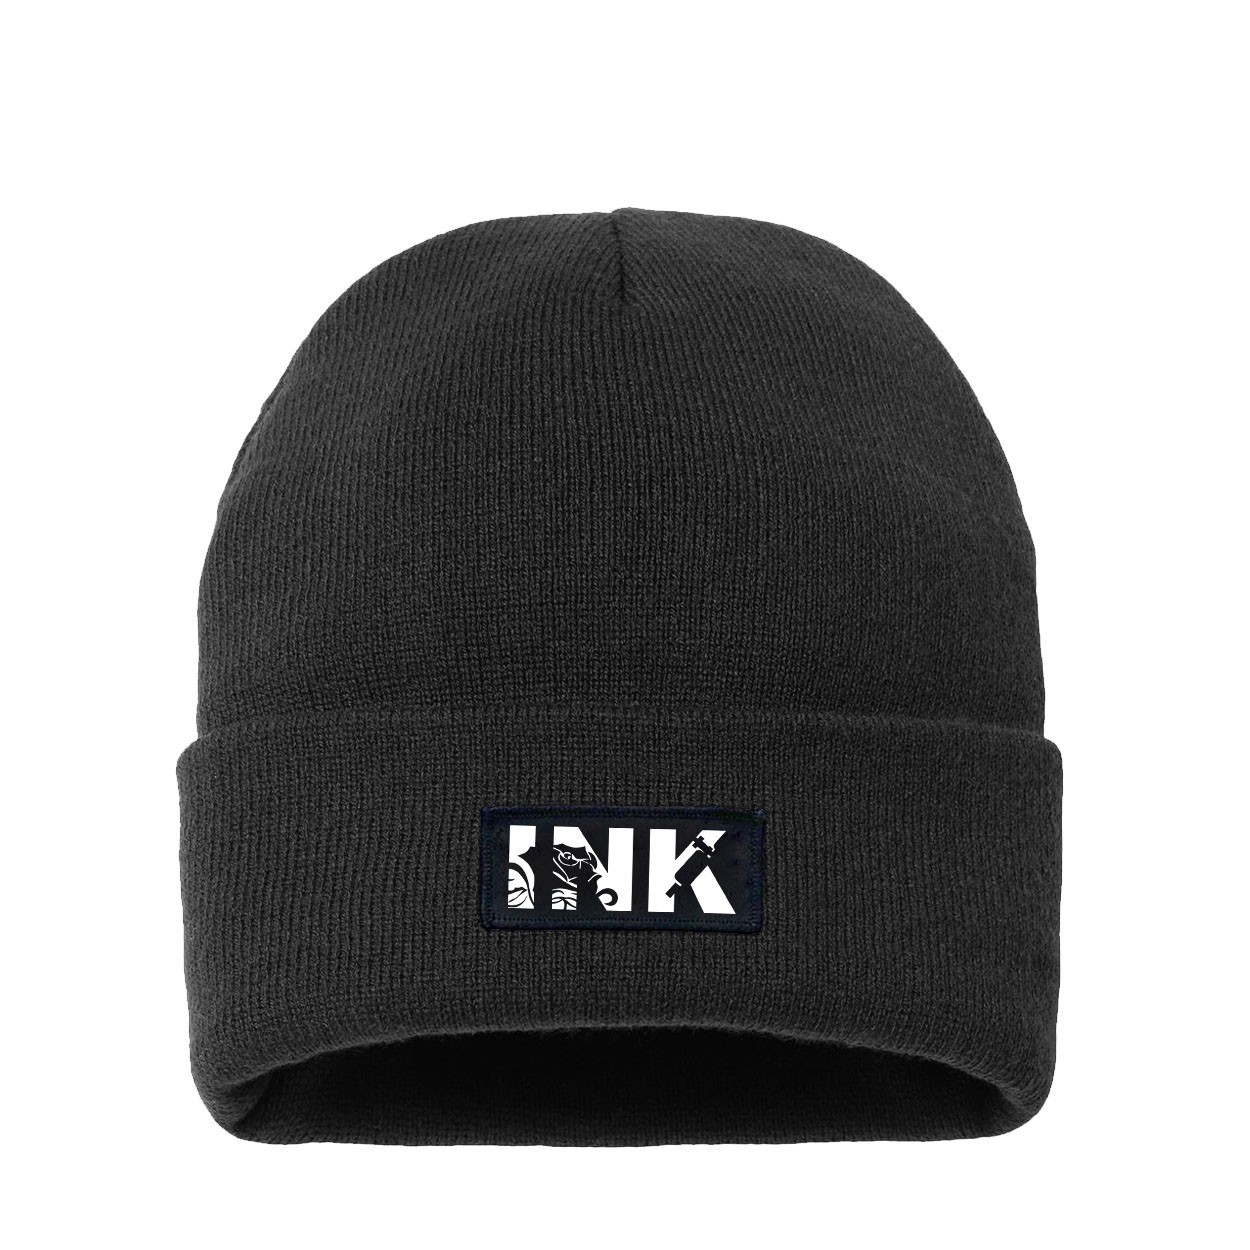 Ink Tattoo Logo Night Out Woven Patch Night Out Sherpa Lined Cuffed Beanie Black (White Logo)